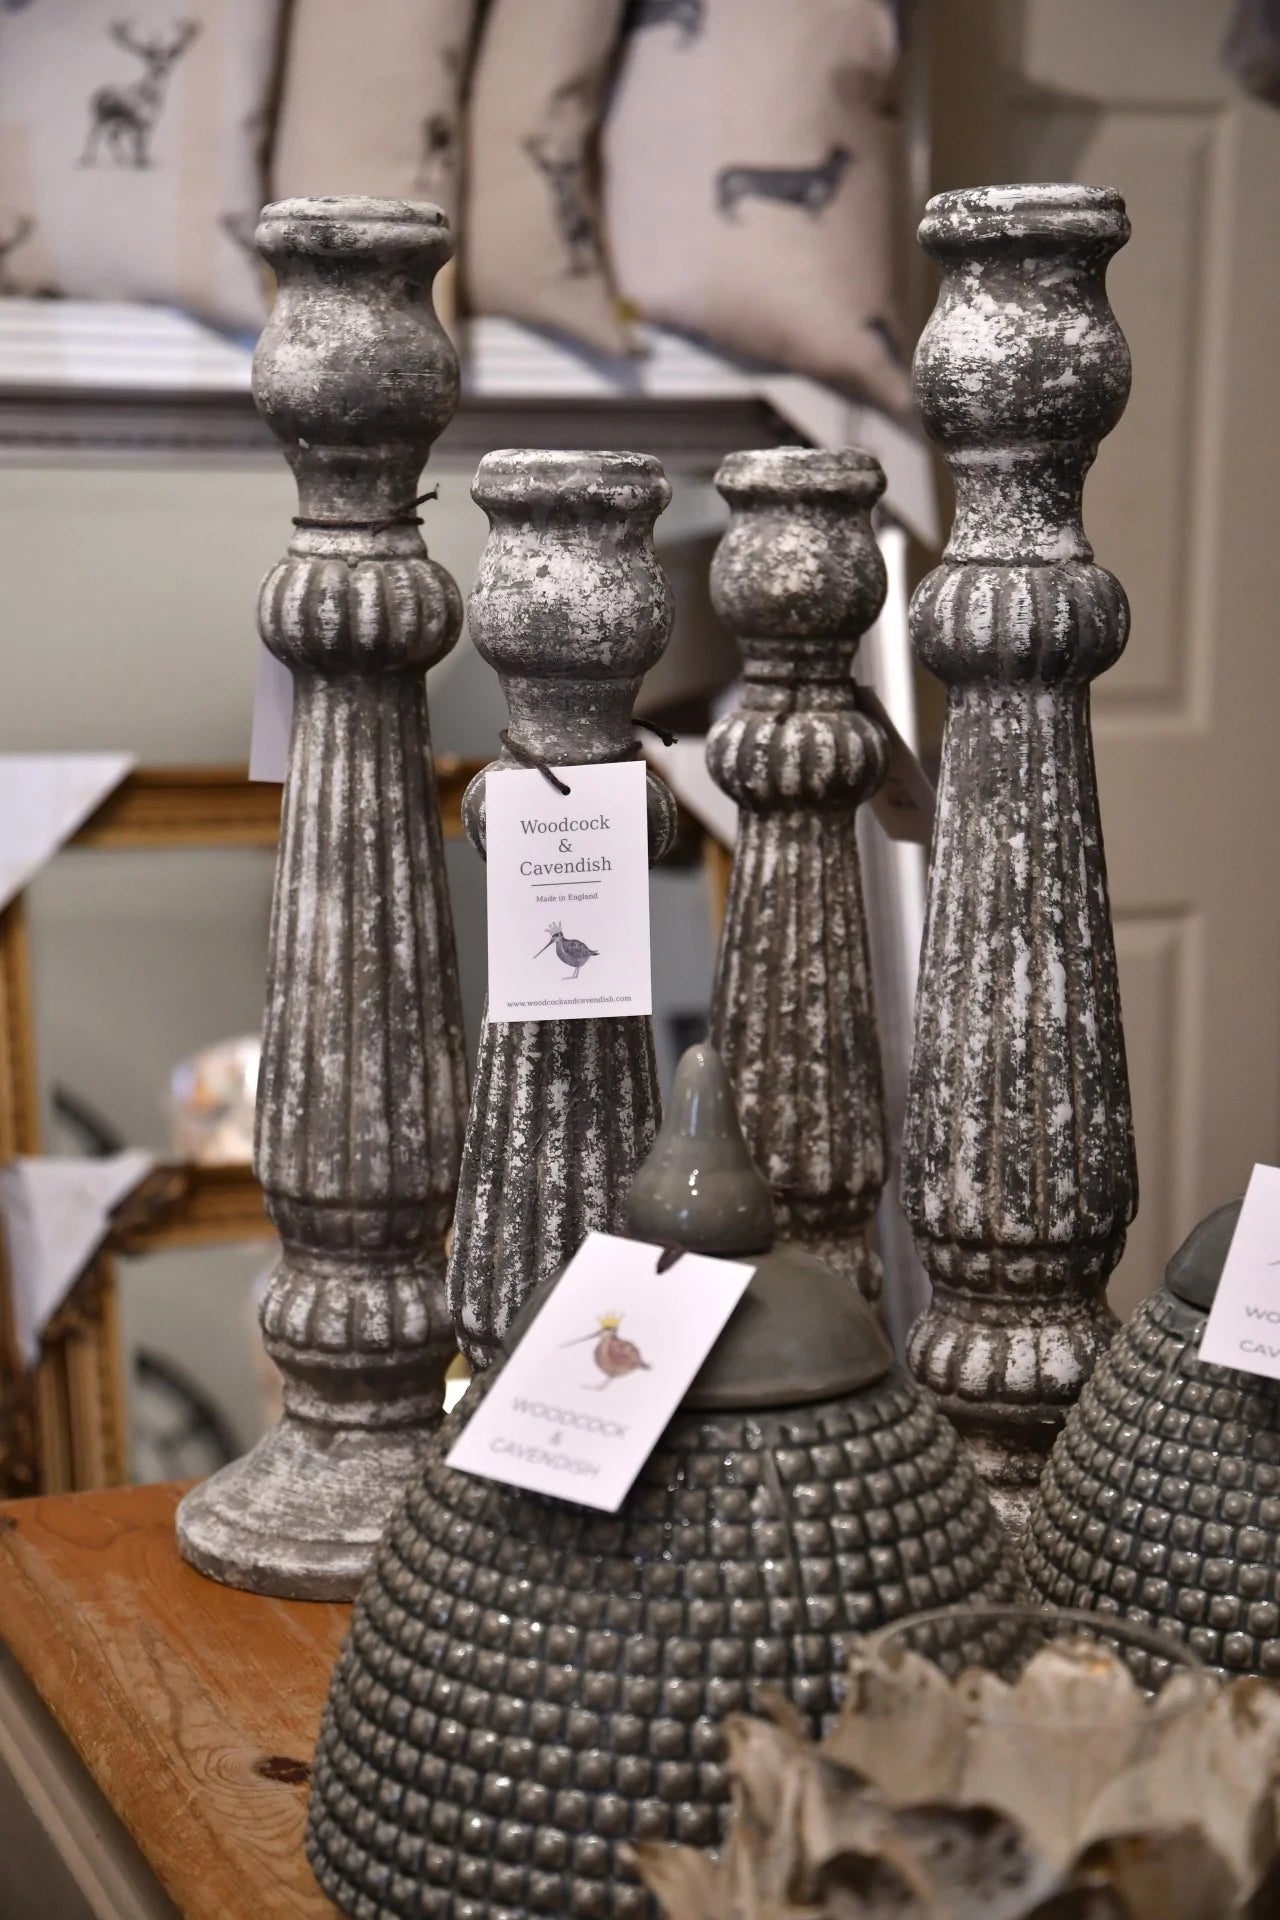 Stone Candlestick for sale - Woodcock and Cavendish